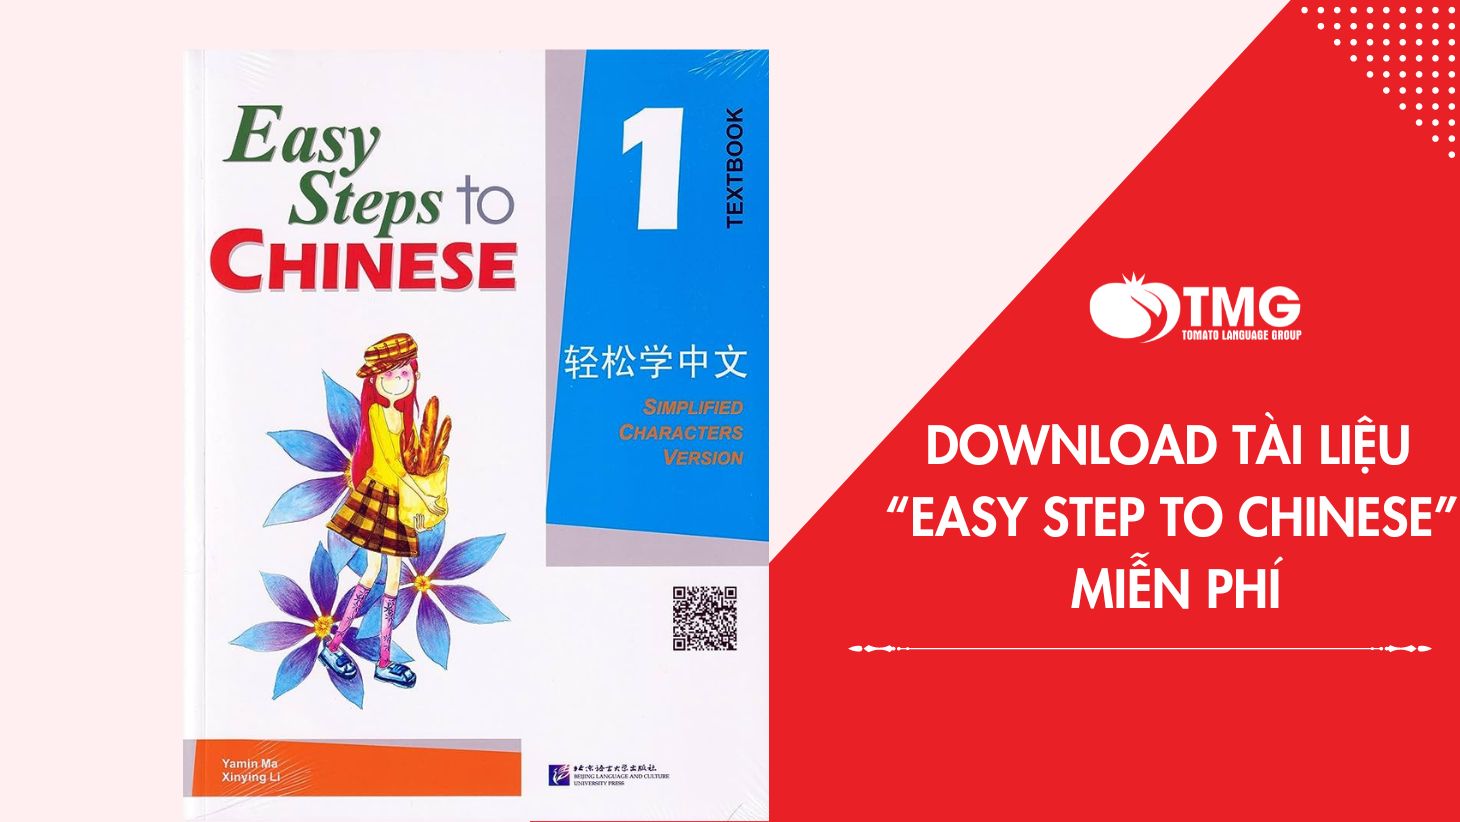 Download Easy step to Chinese miễn phí